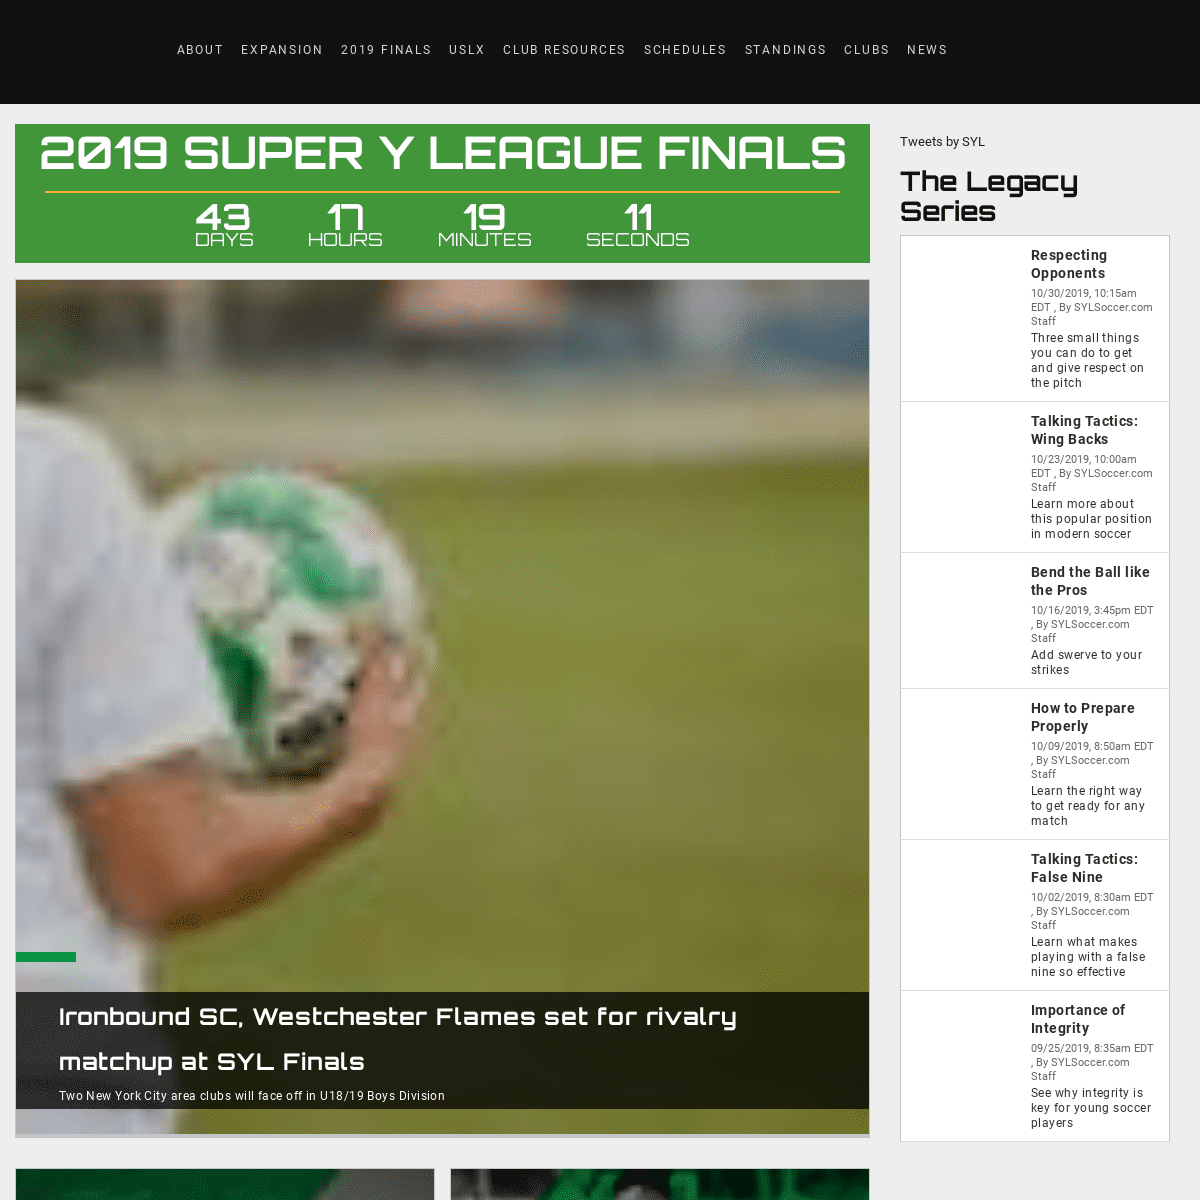 A complete backup of sylsoccer.com